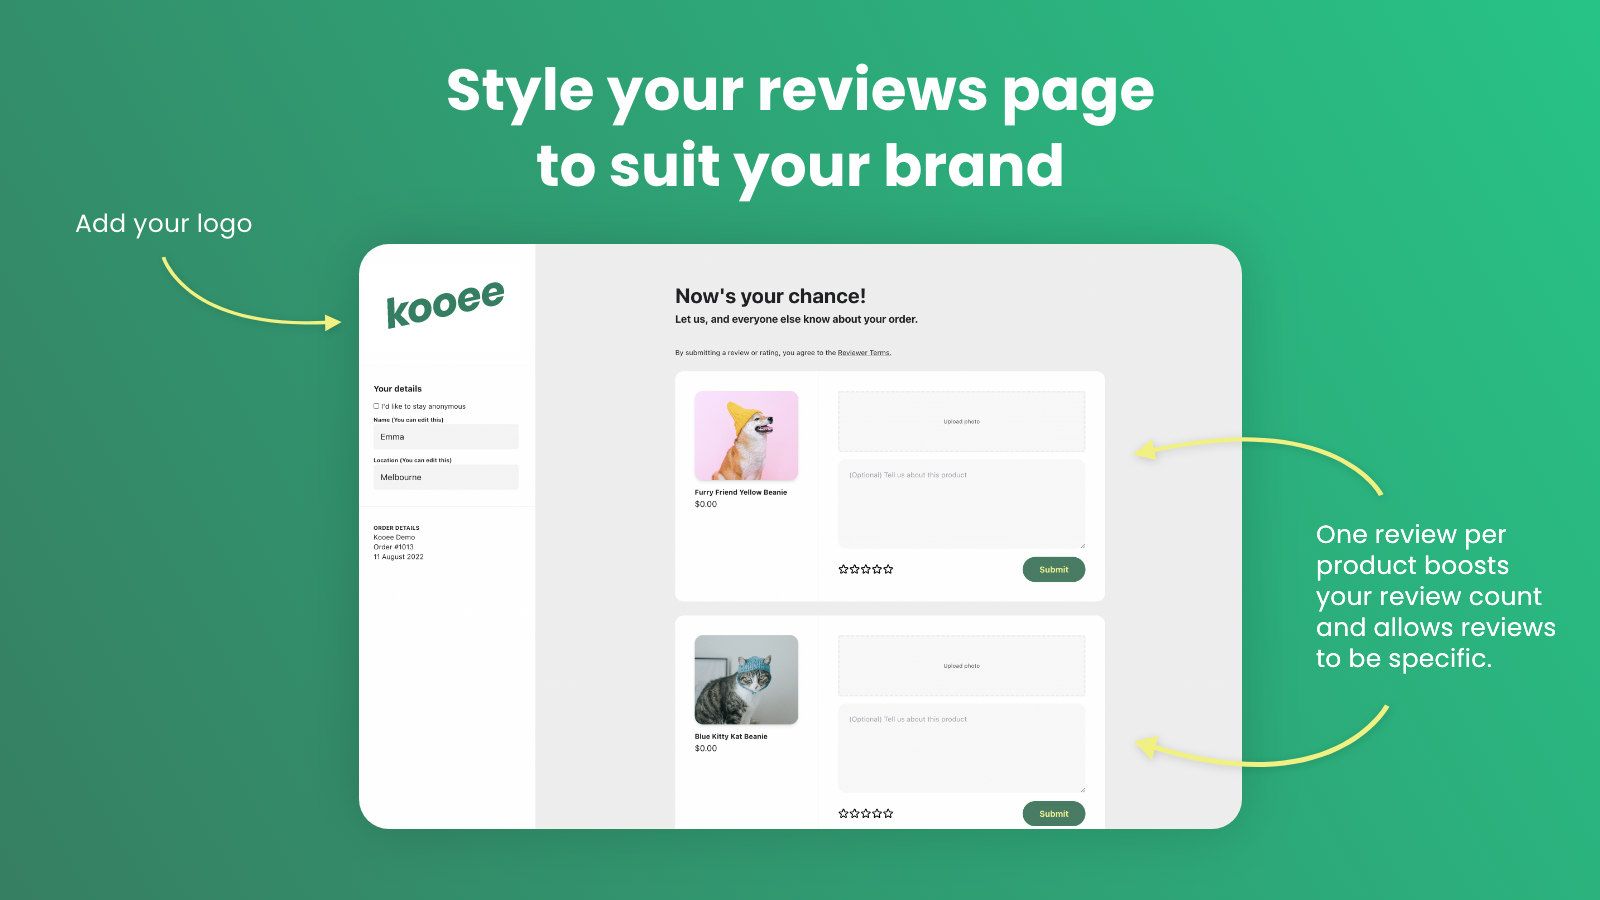 Style your review page